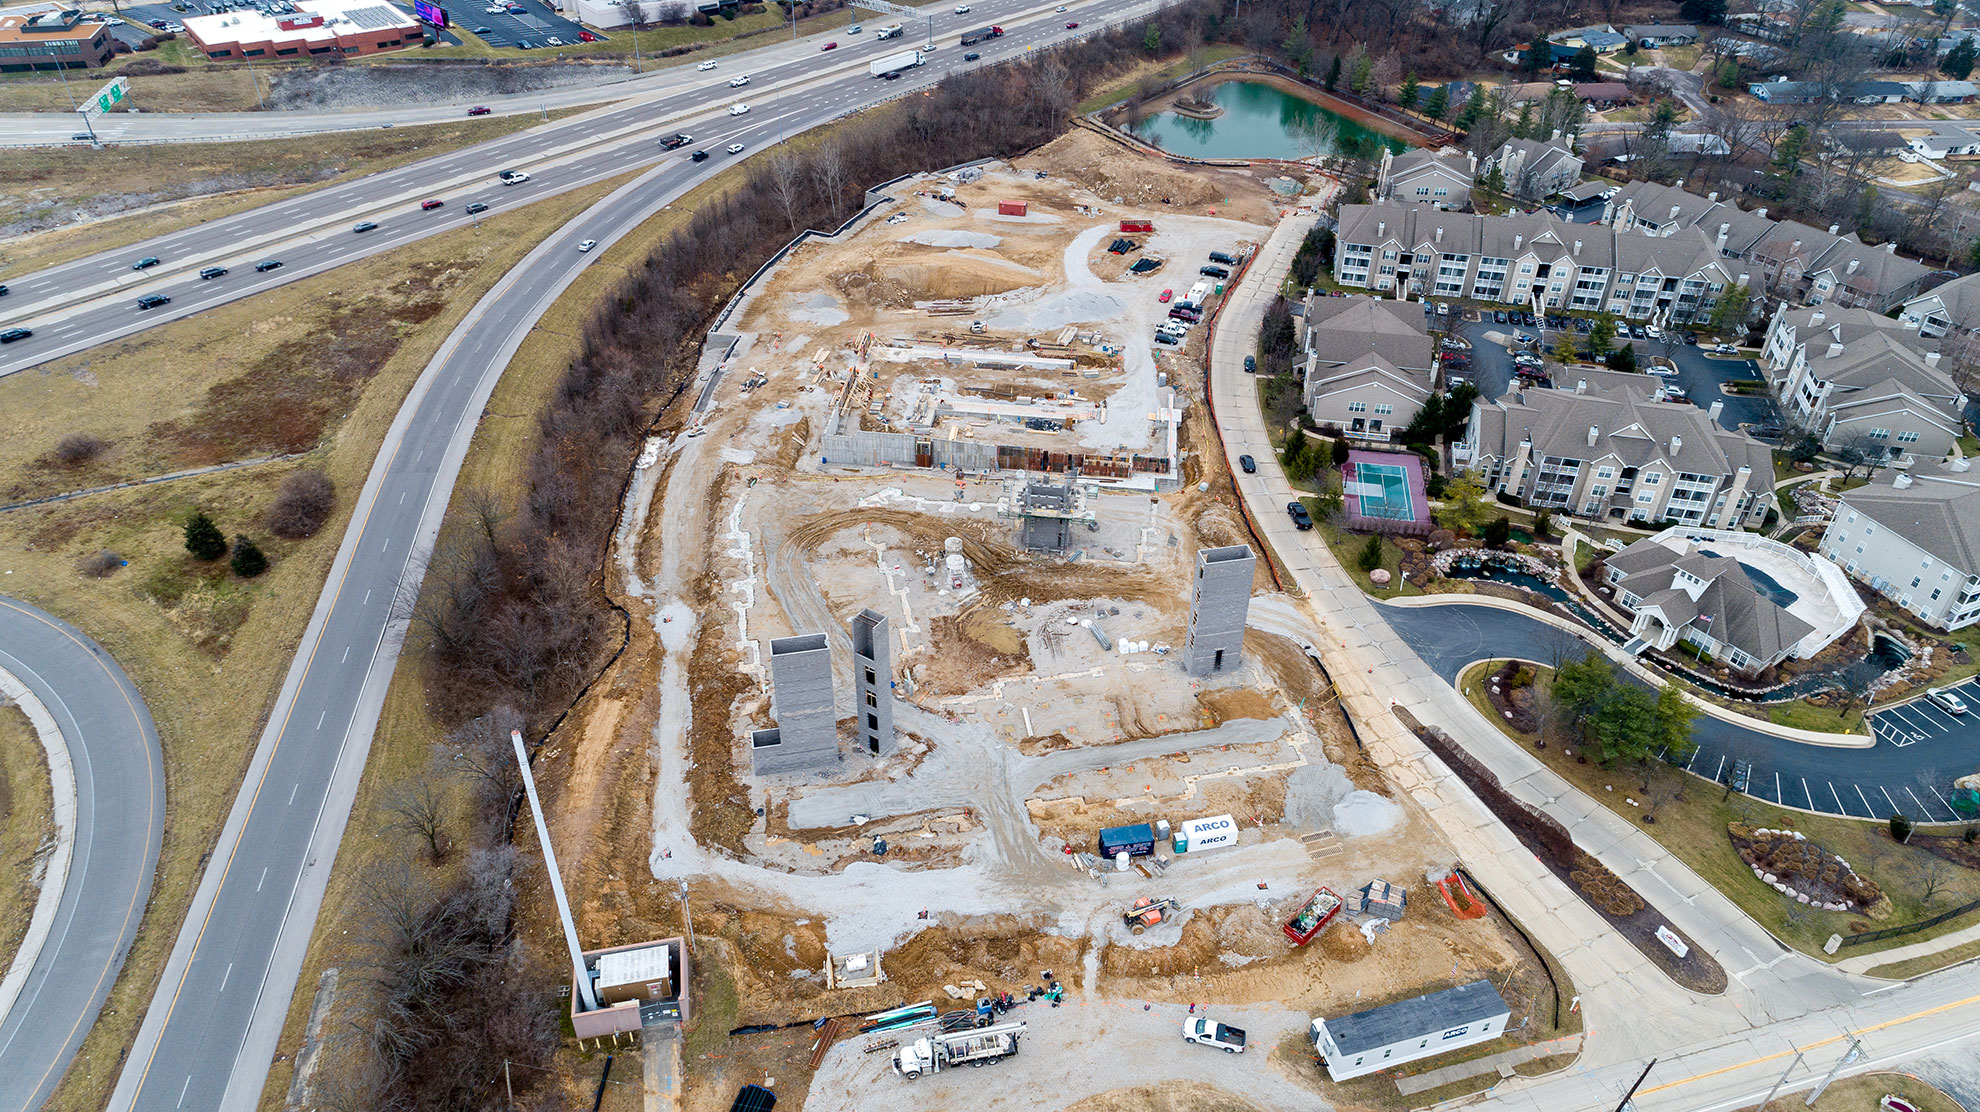 NEO Vantage Pointe | ARCO Construction Company Project in Maryland Heights, Missouri